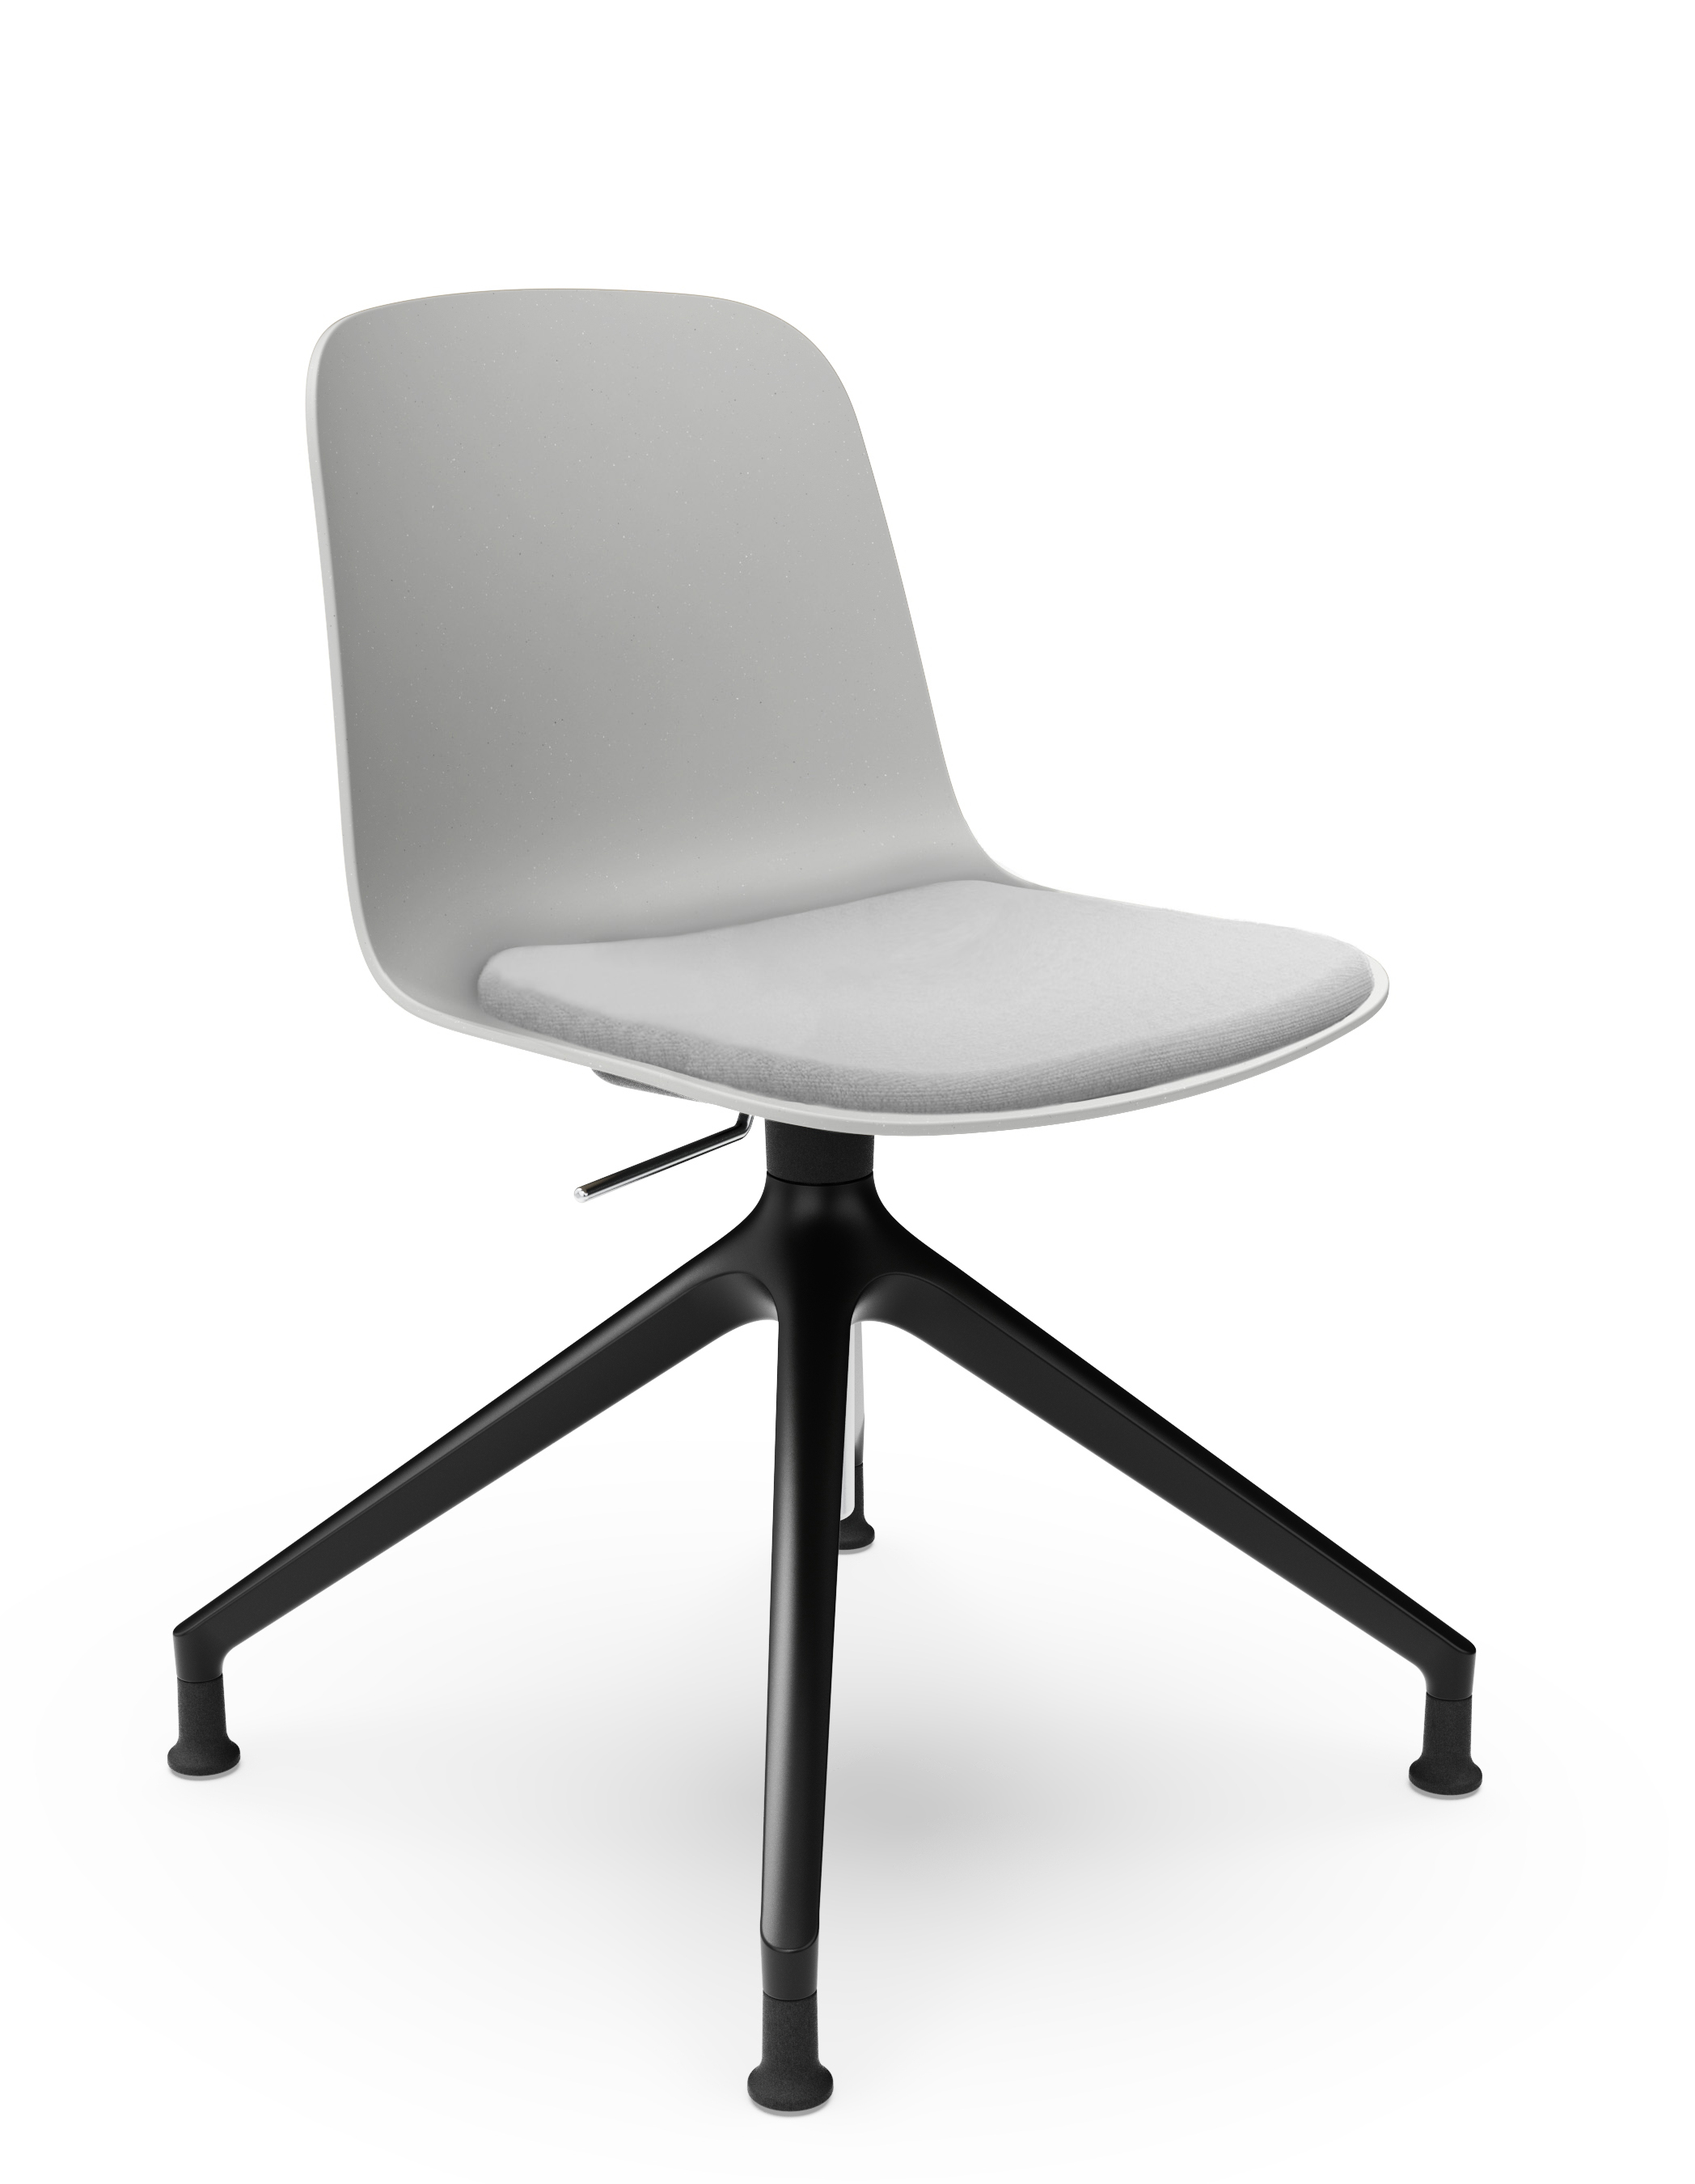 WS - Moto Seat Pad Side Chair - Black 4-star base, with gas lift - Chalk